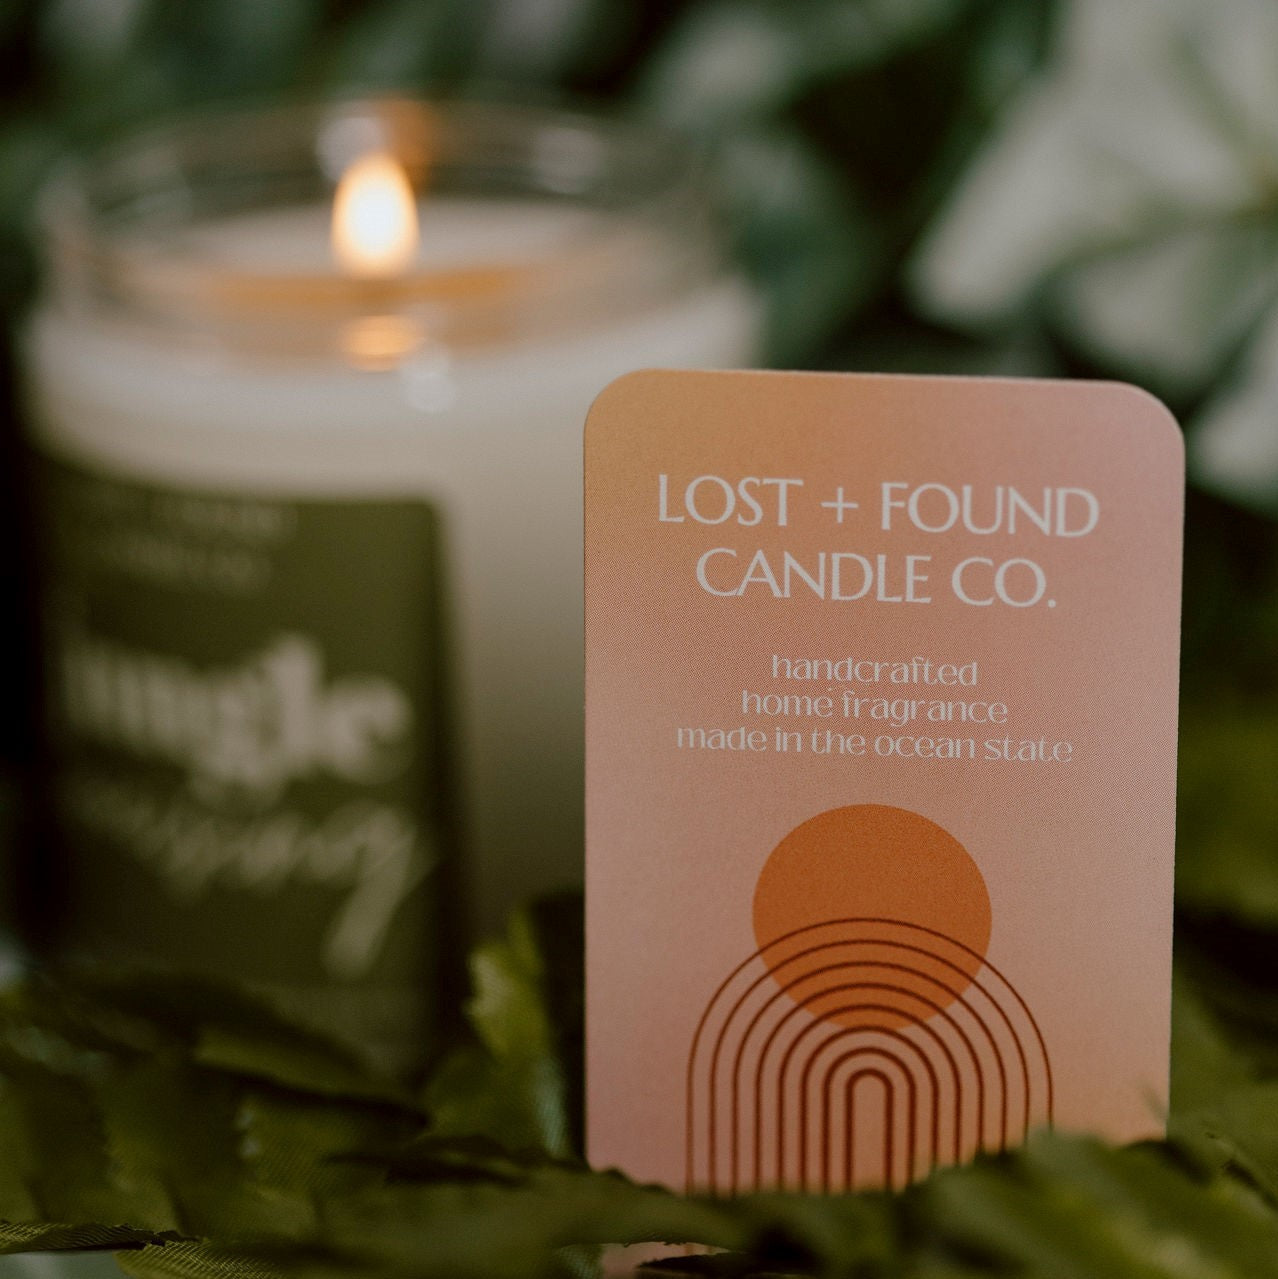 Lost and Found Candle Co. business card in front of Jungle Cruising candle